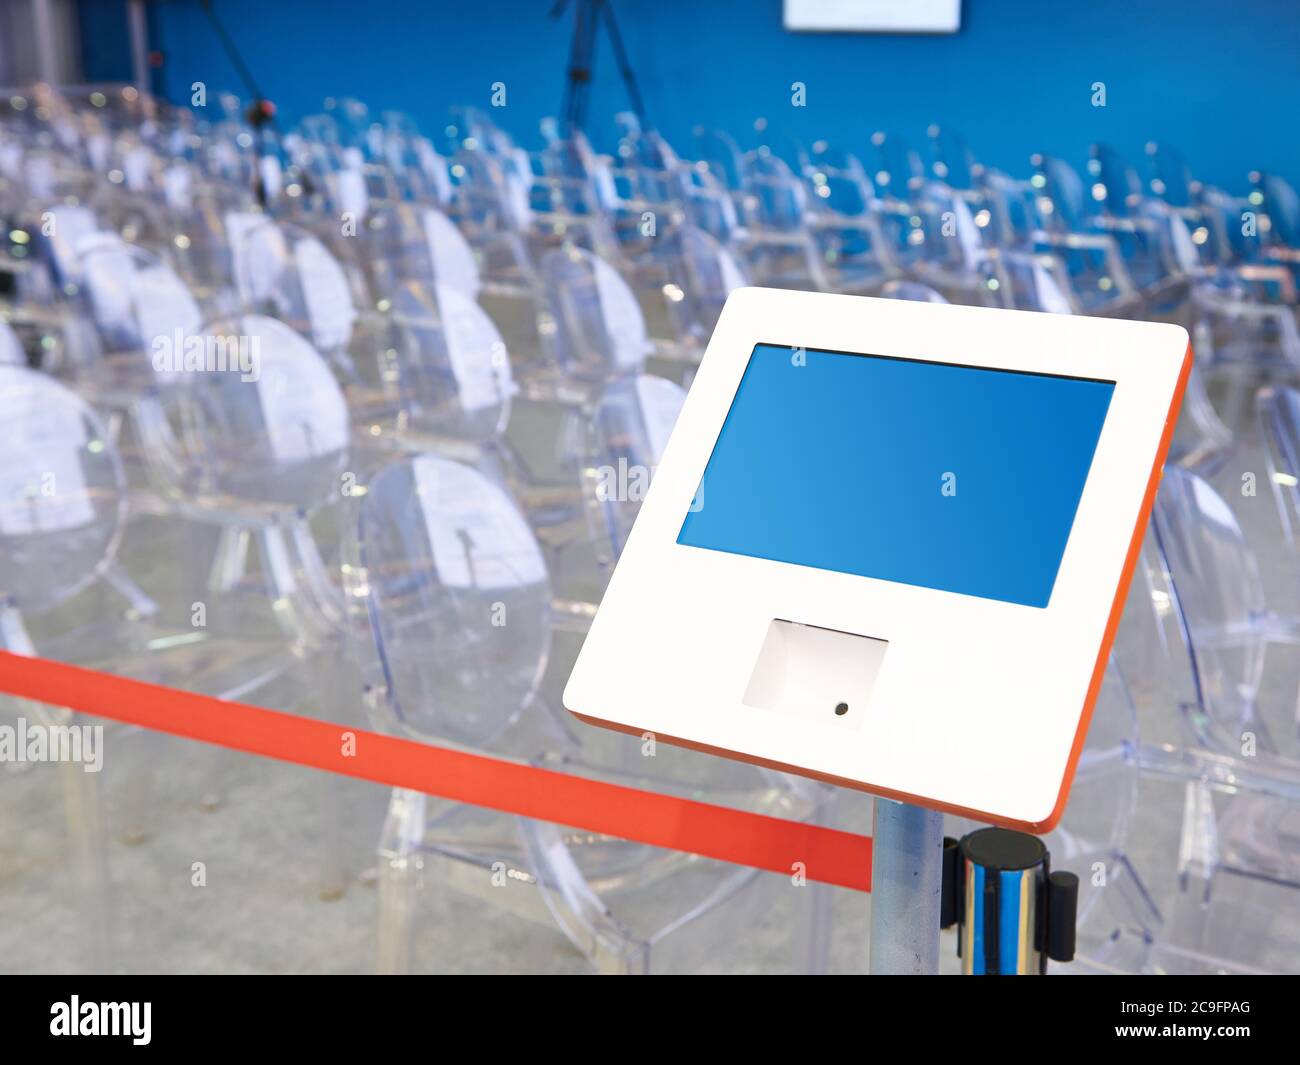 Electronic device for registering visitors to the conference Stock Photo